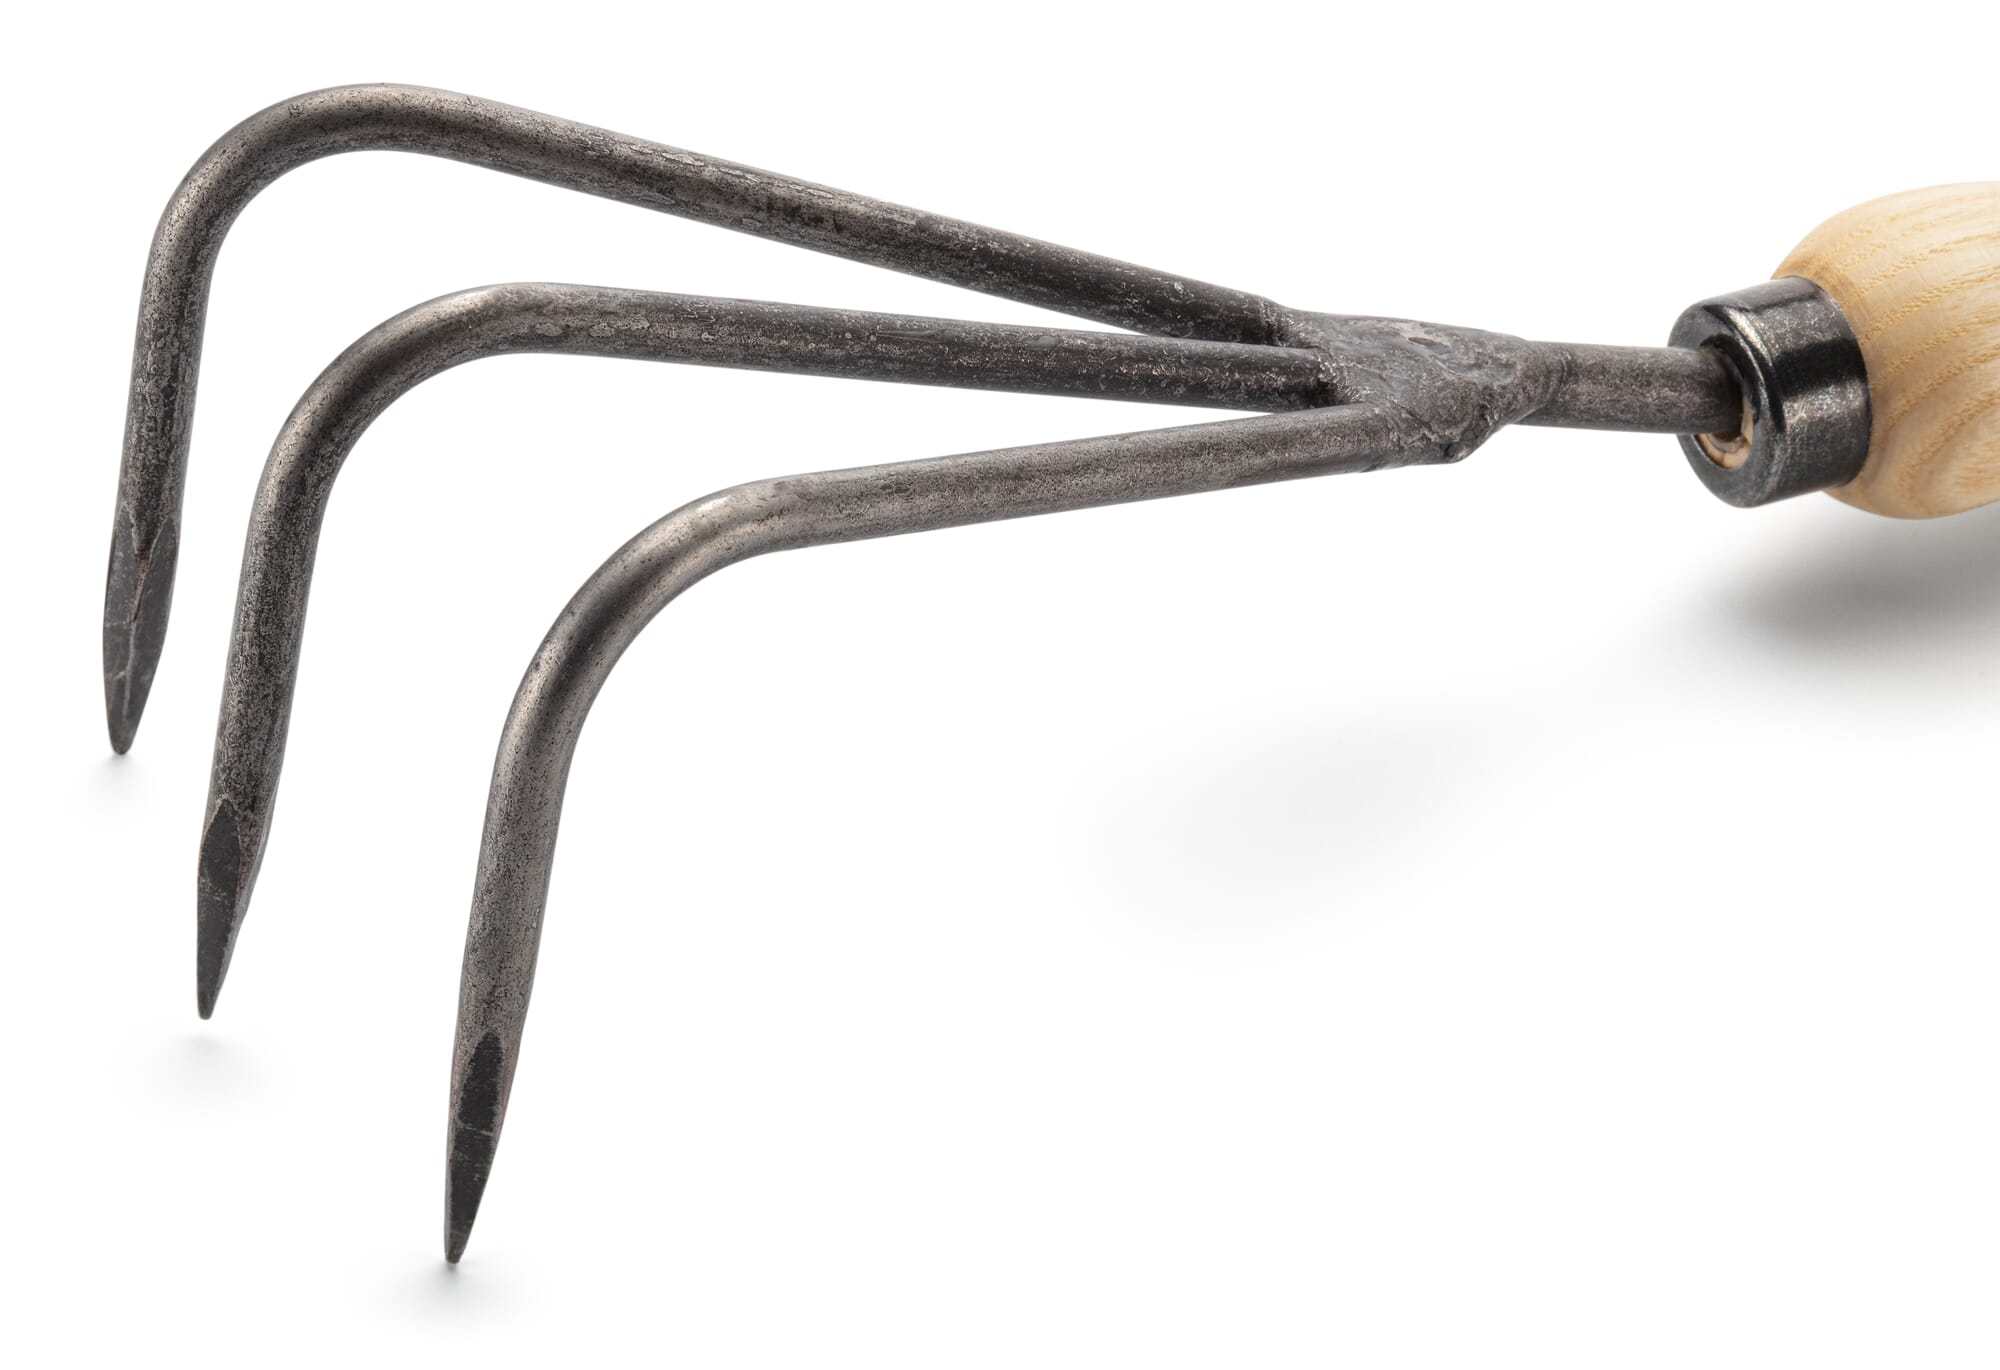 Hand cultivator